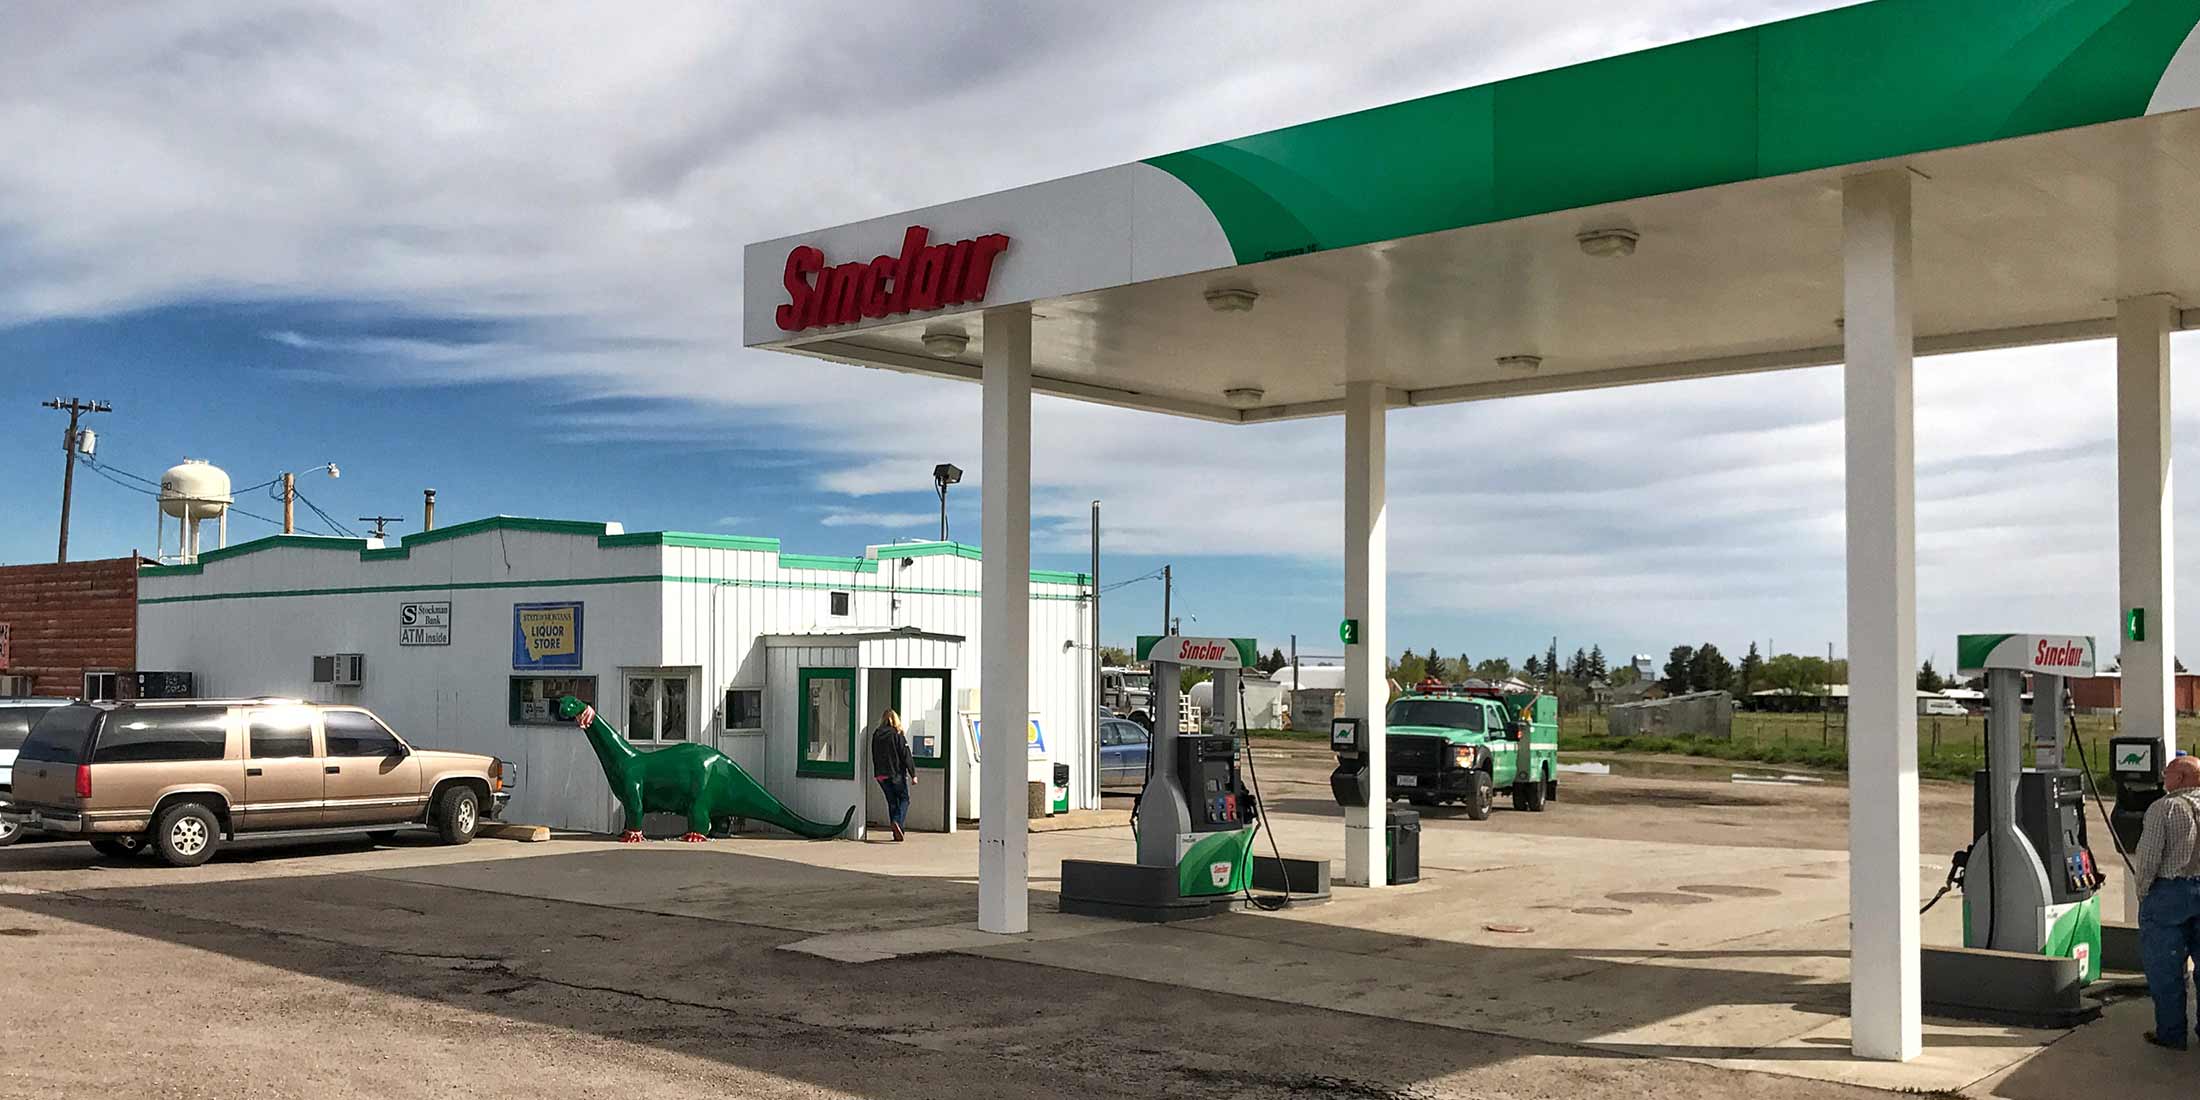 Find all Gas & Auto in the community of Stanford, Montana located in Judith Basin County on Highway 12. 